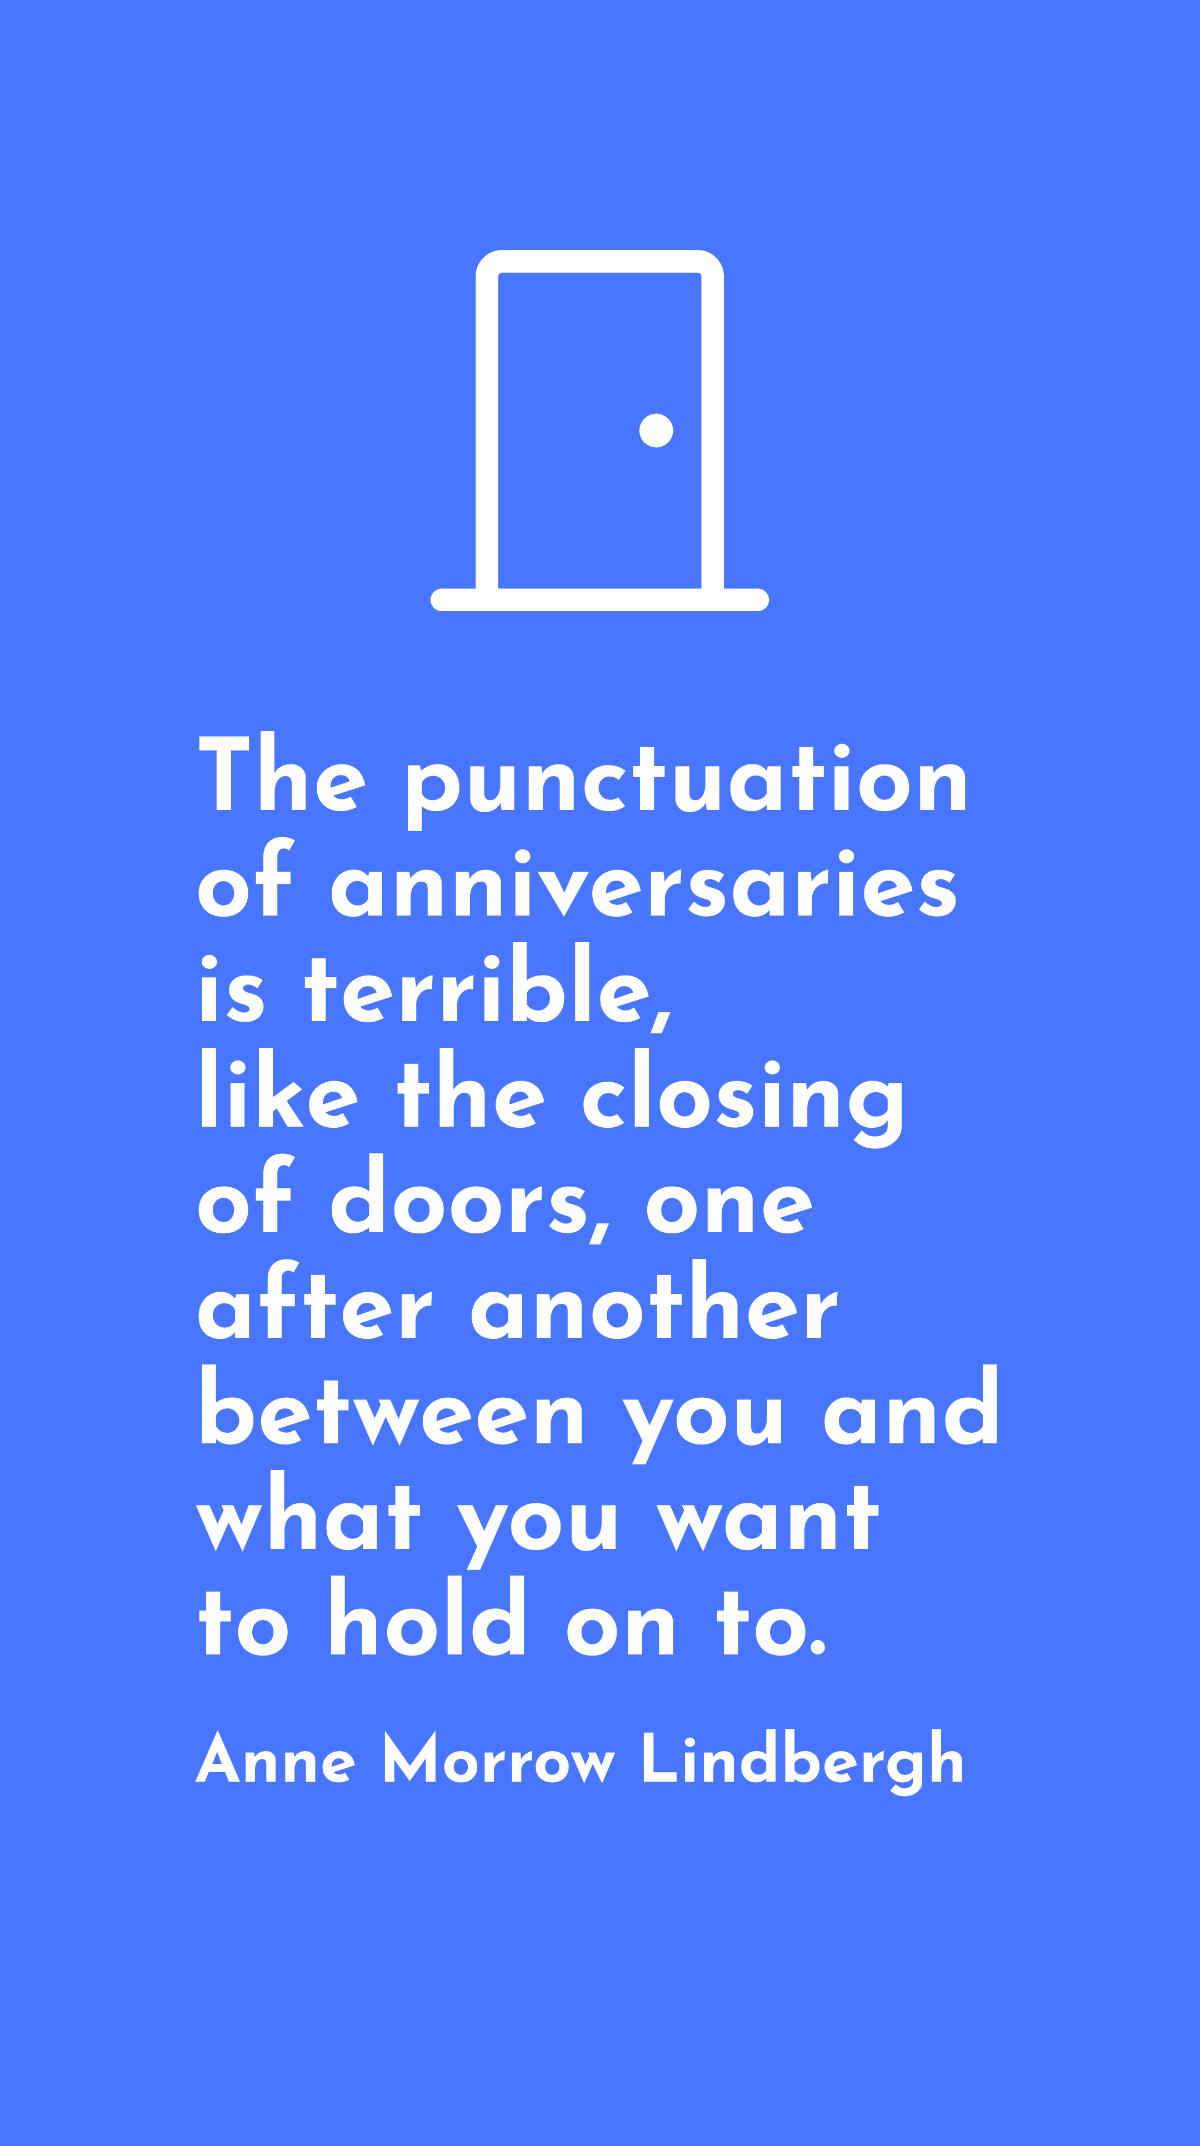 Free Anne Morrow Lindbergh - The punctuation of anniversaries is terrible, like the closing of doors, one after another between you and what you want to hold on to. Template